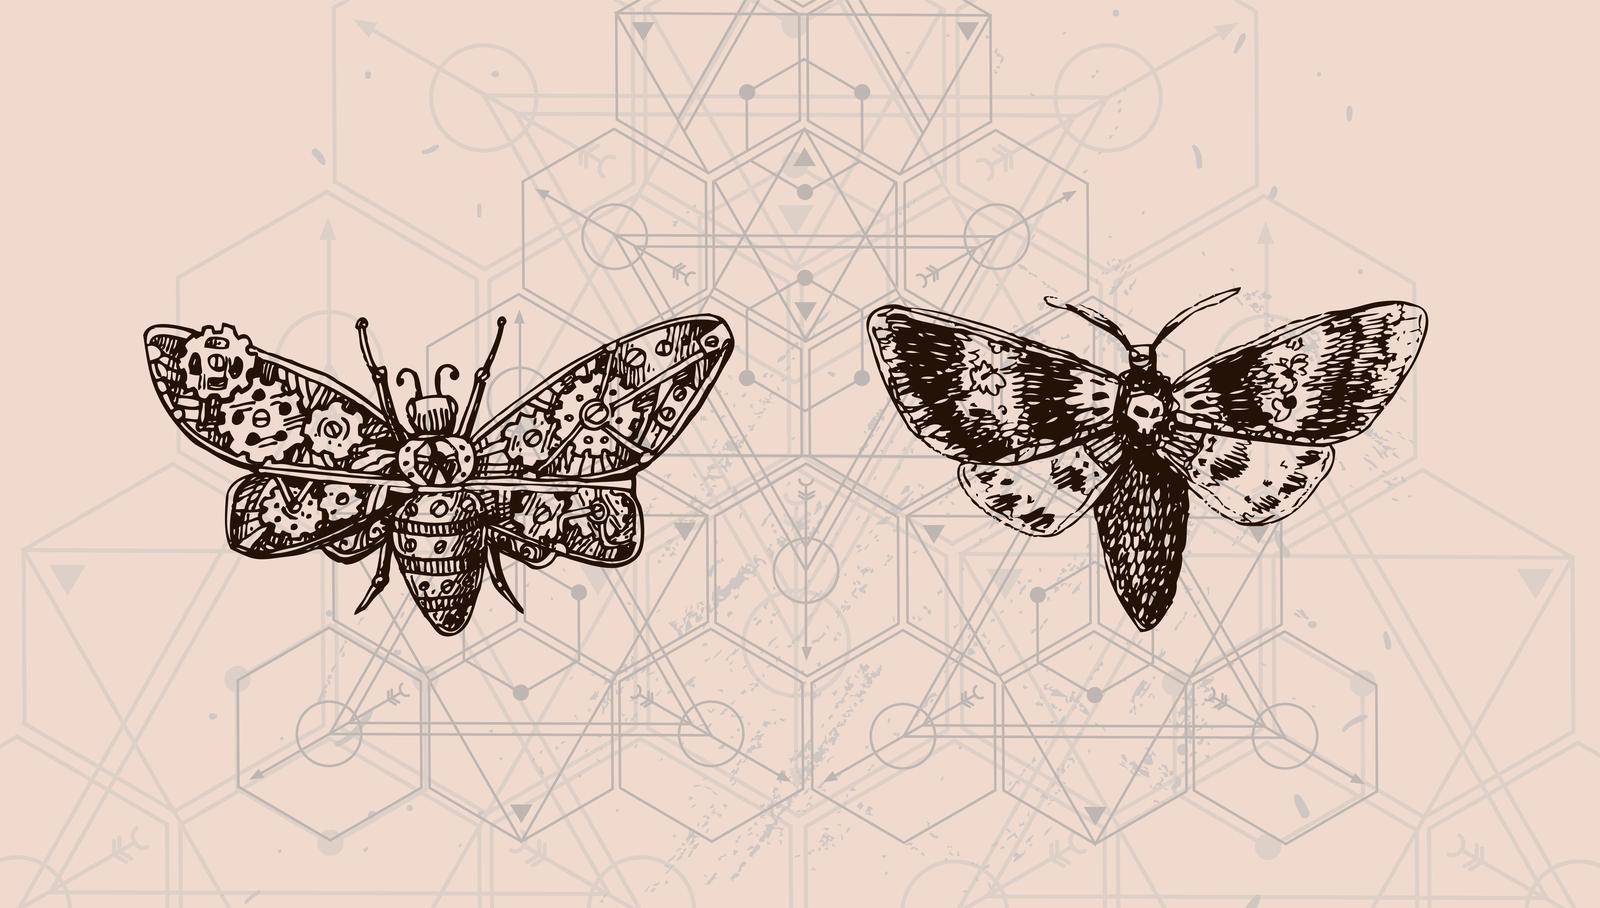 Butterfly and sacred geometry. Hand drawn vector illustration could be used for textile, yoga mat, phone case, t-shirt, etc